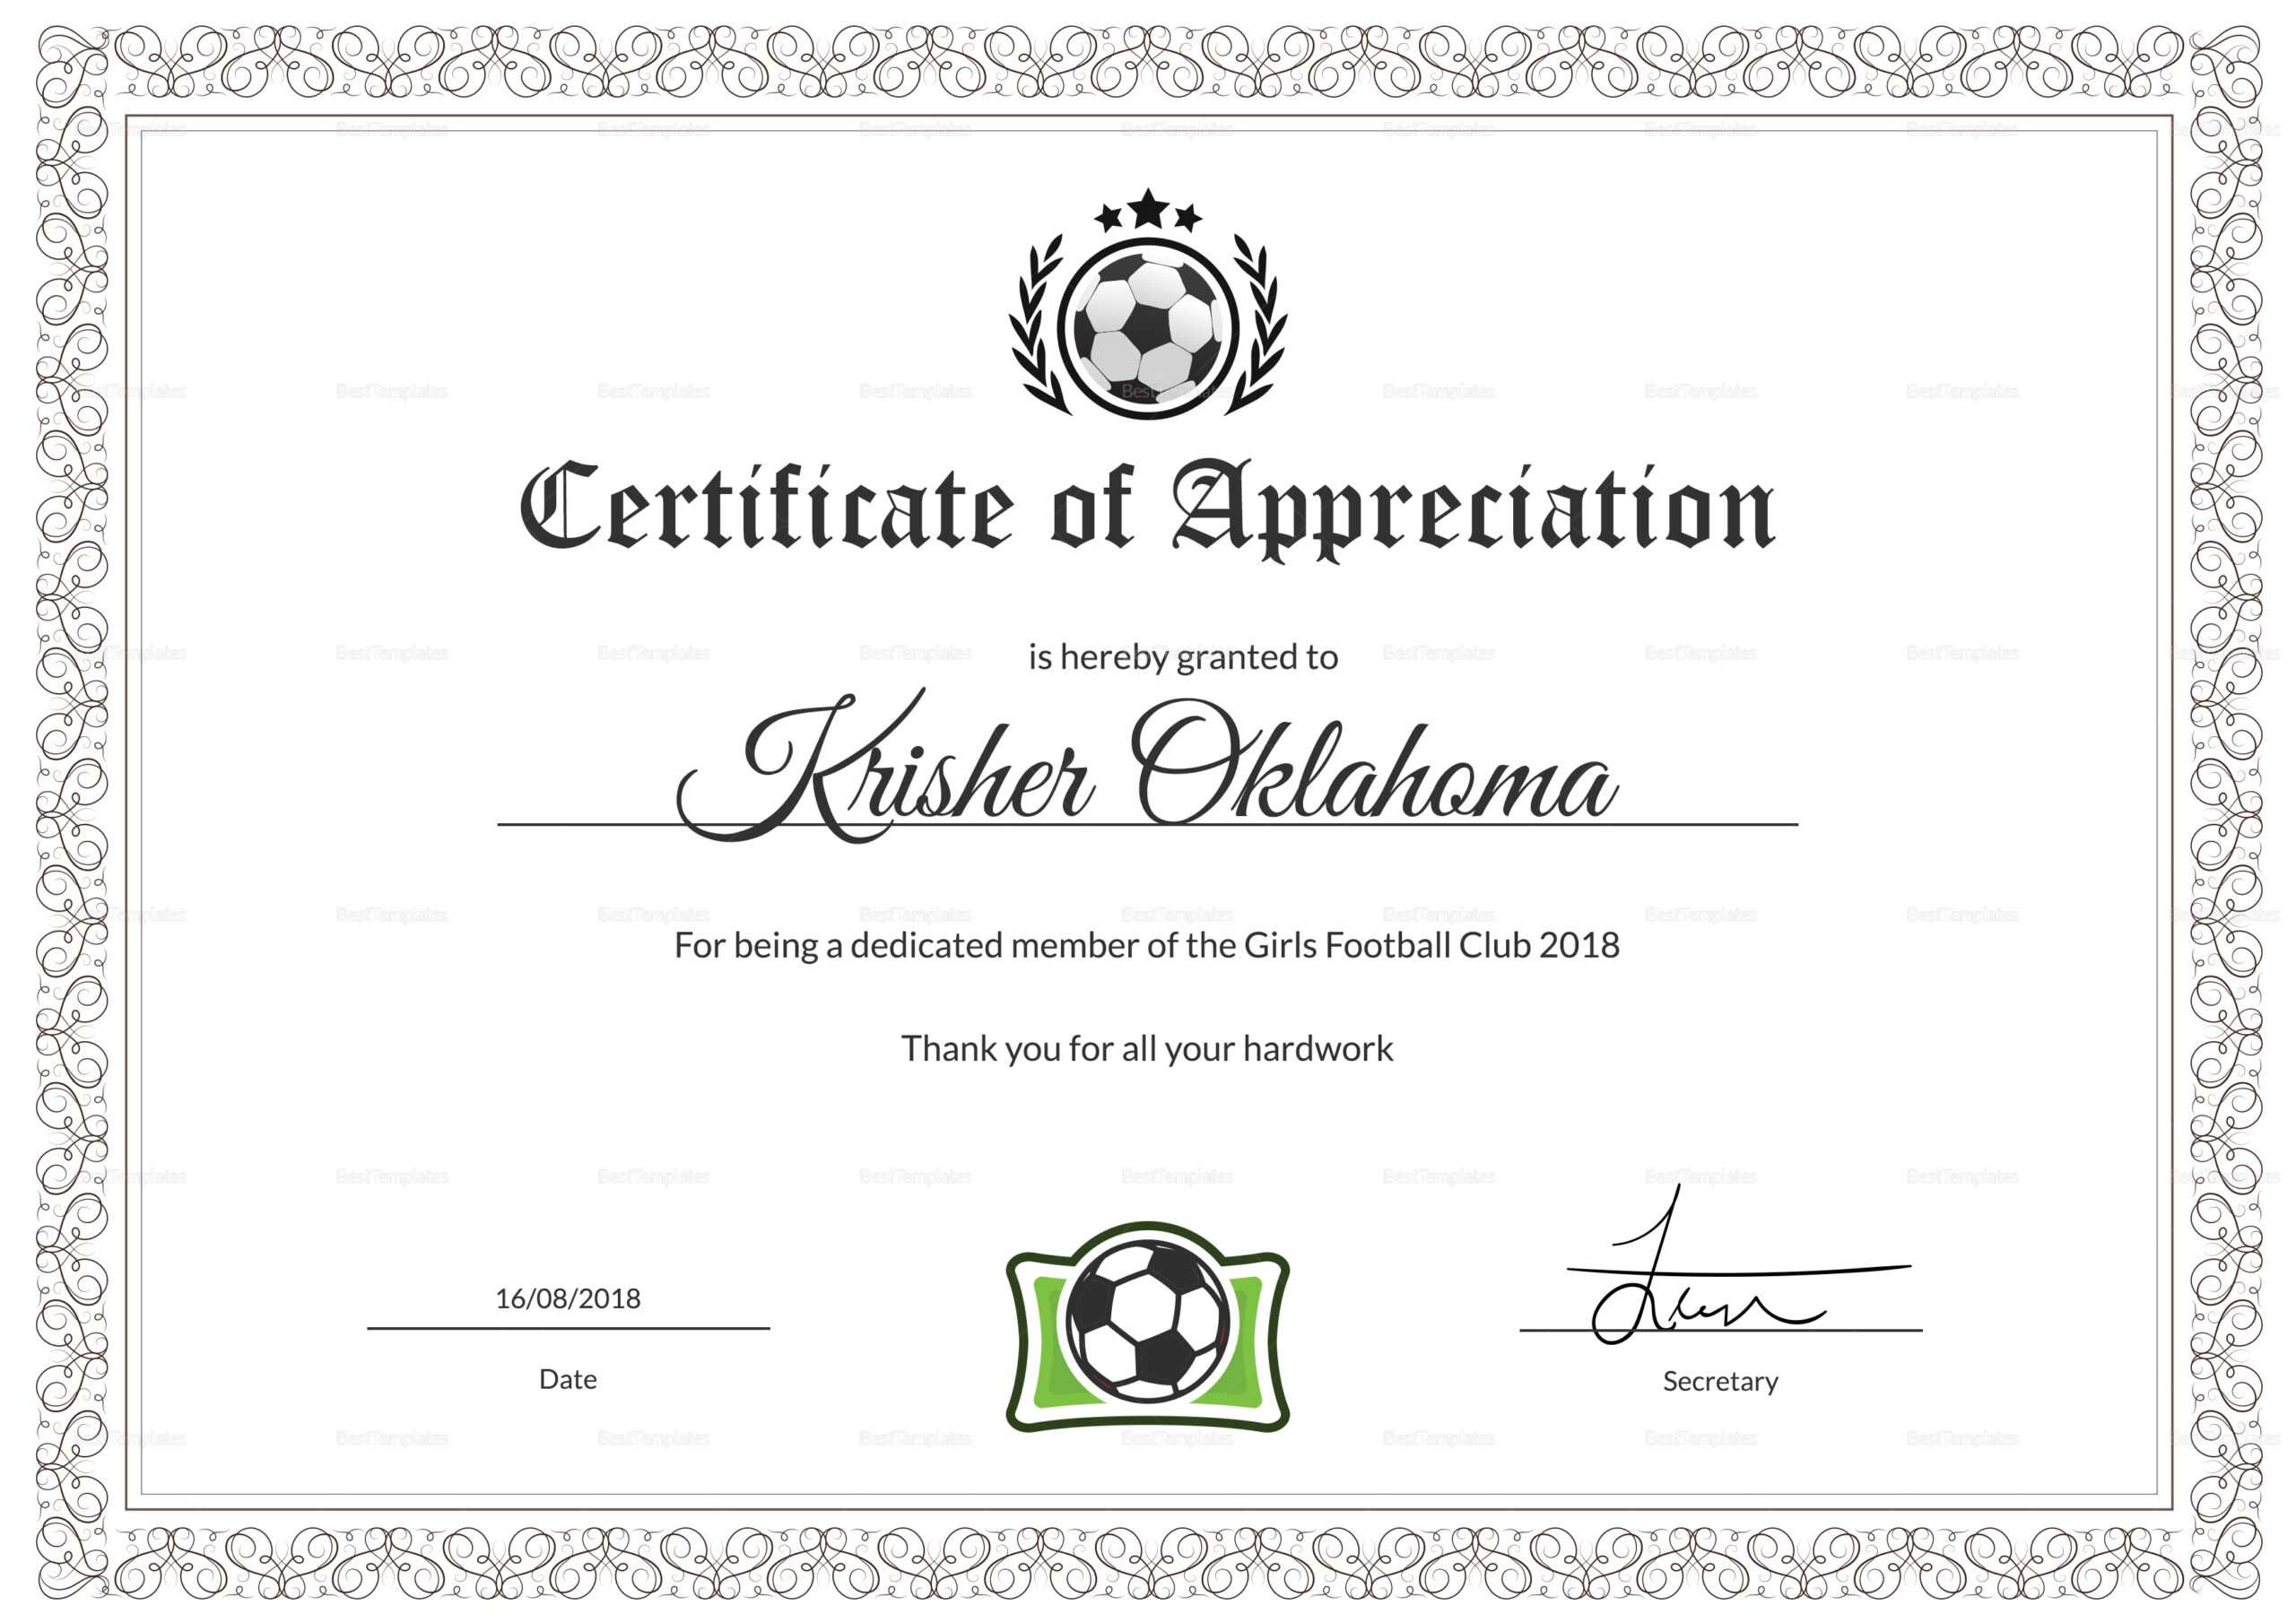 41Ba Certificates Templates For Word And Sports Day Inside Golf Certificate Templates For Word